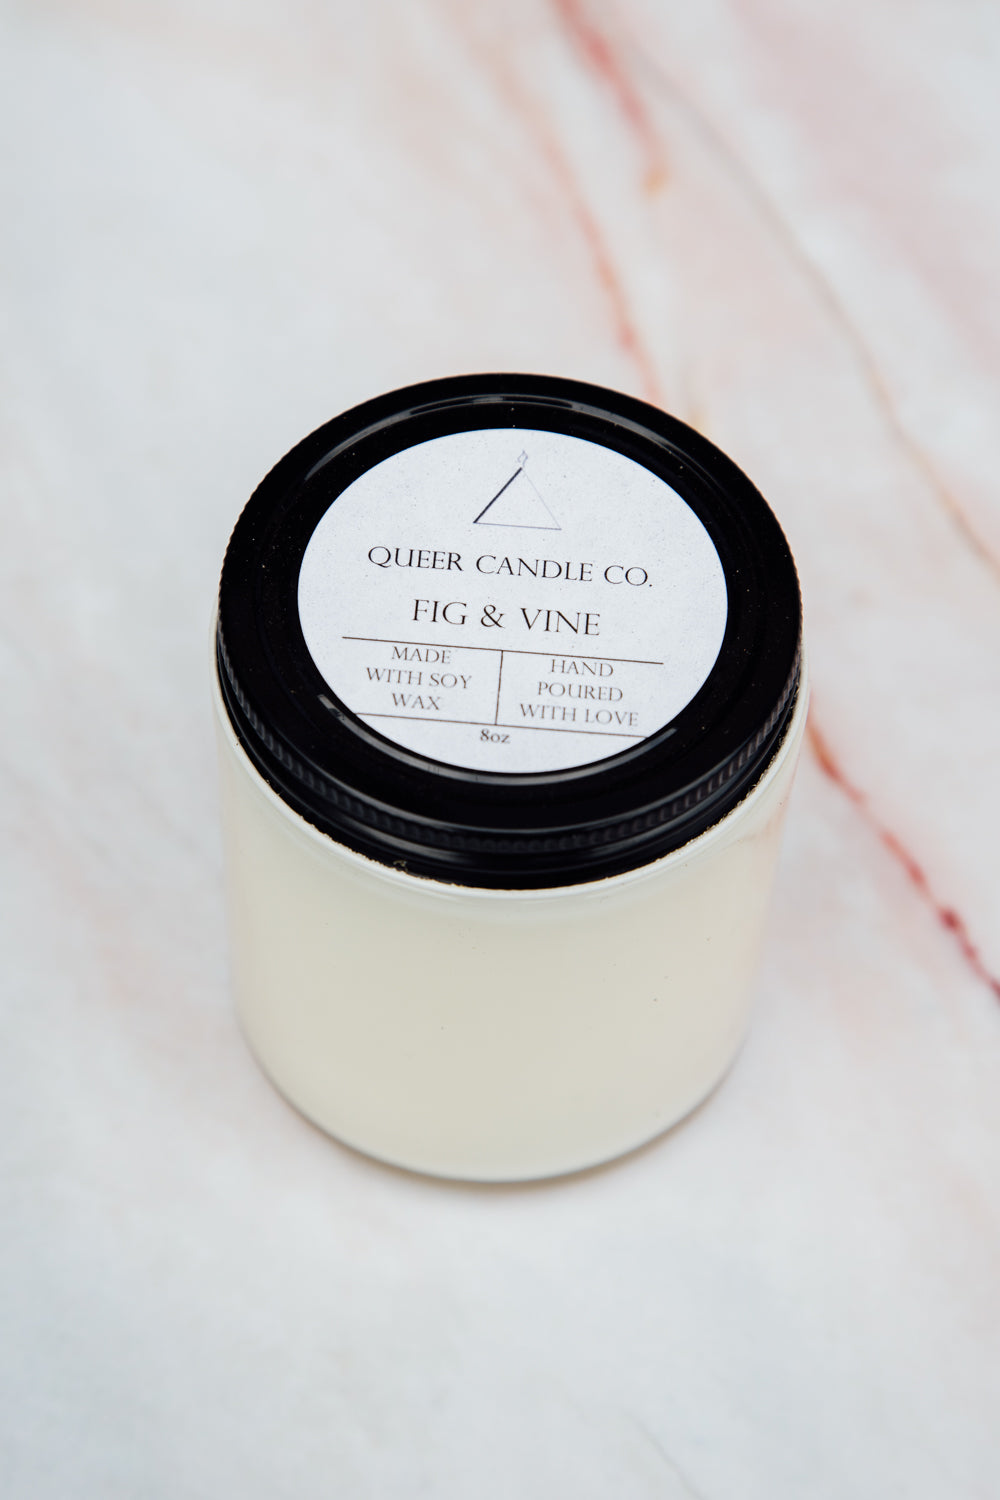 Queer Candle - Fig & Vine